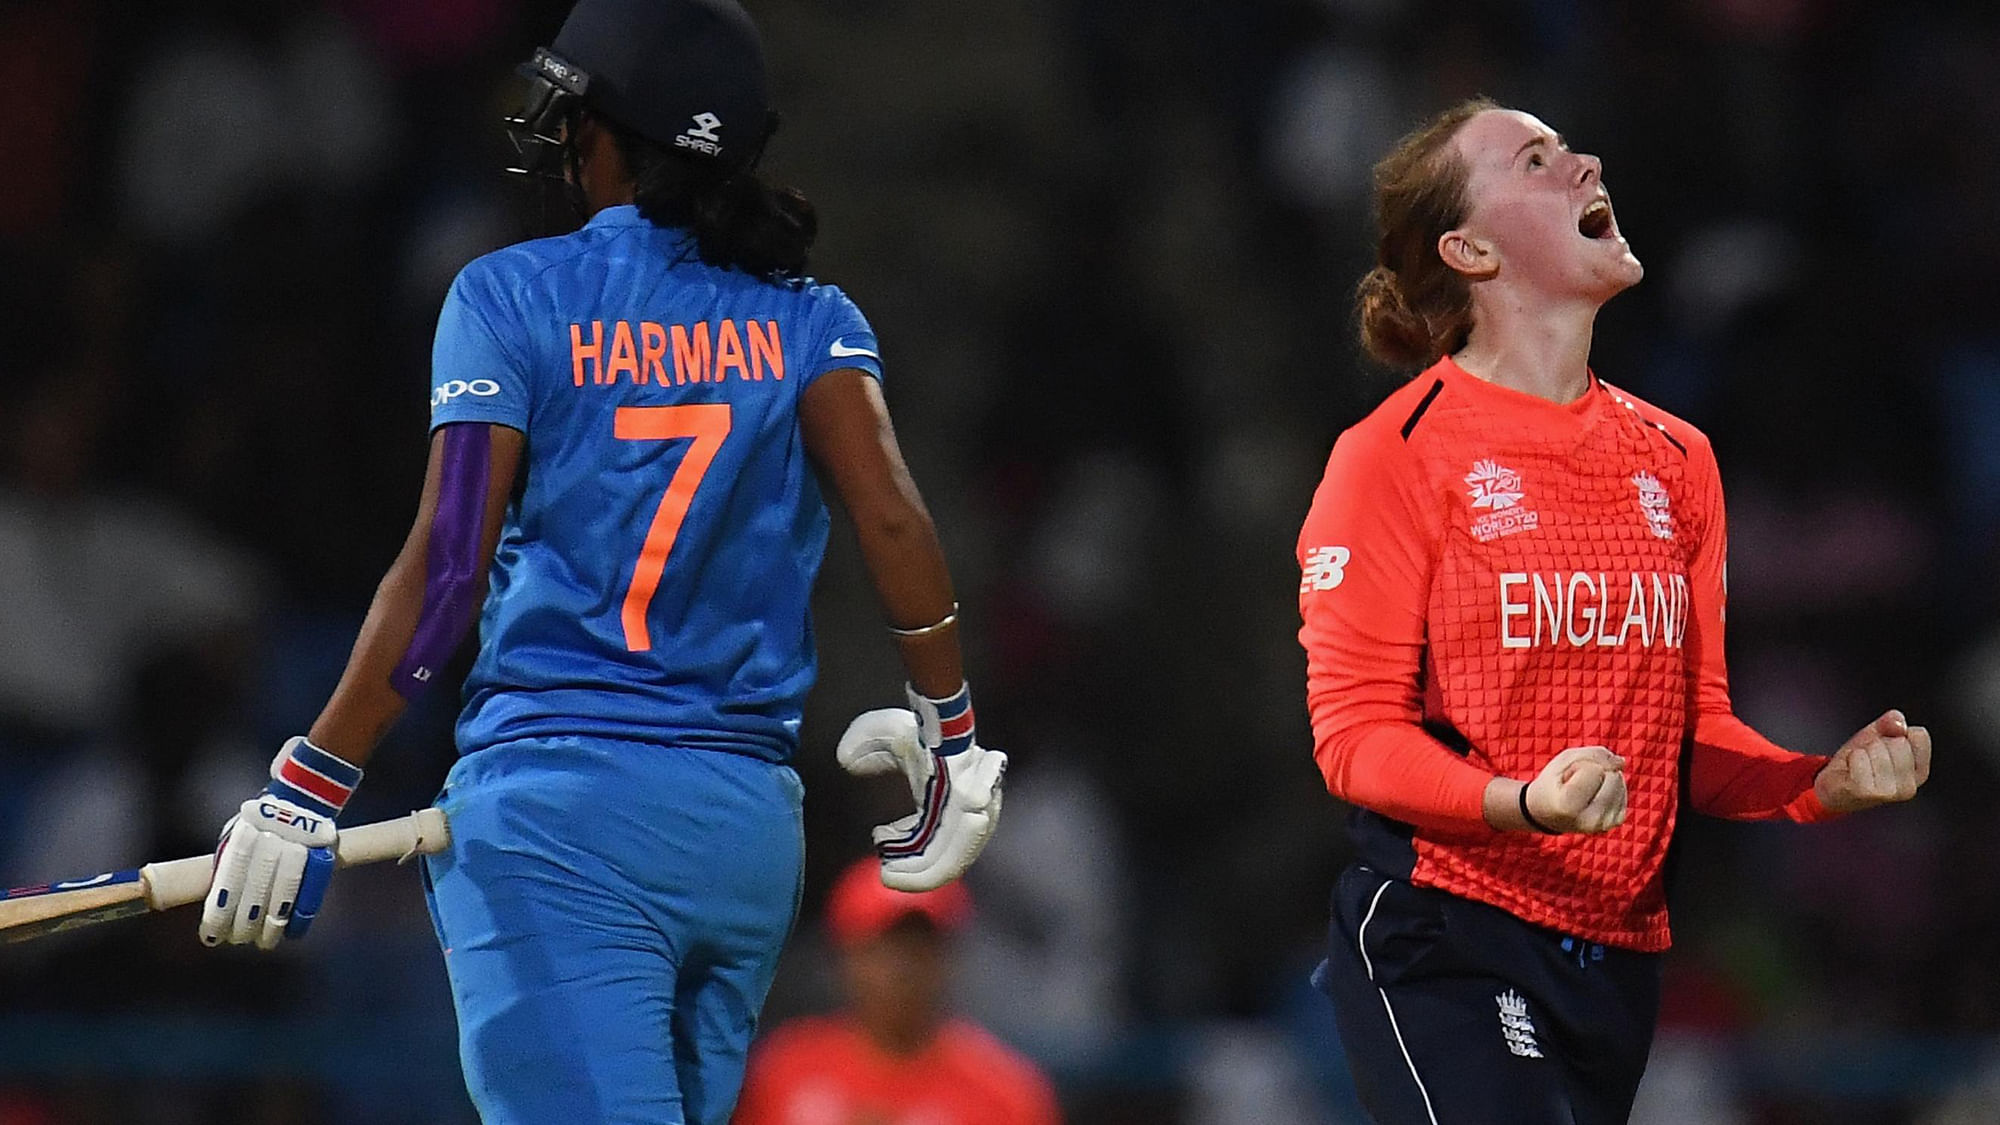 Kirstie Gordon celebrates the wicket of Harmanpreet Singh during the Women’s World T20 semi-final between England and India.